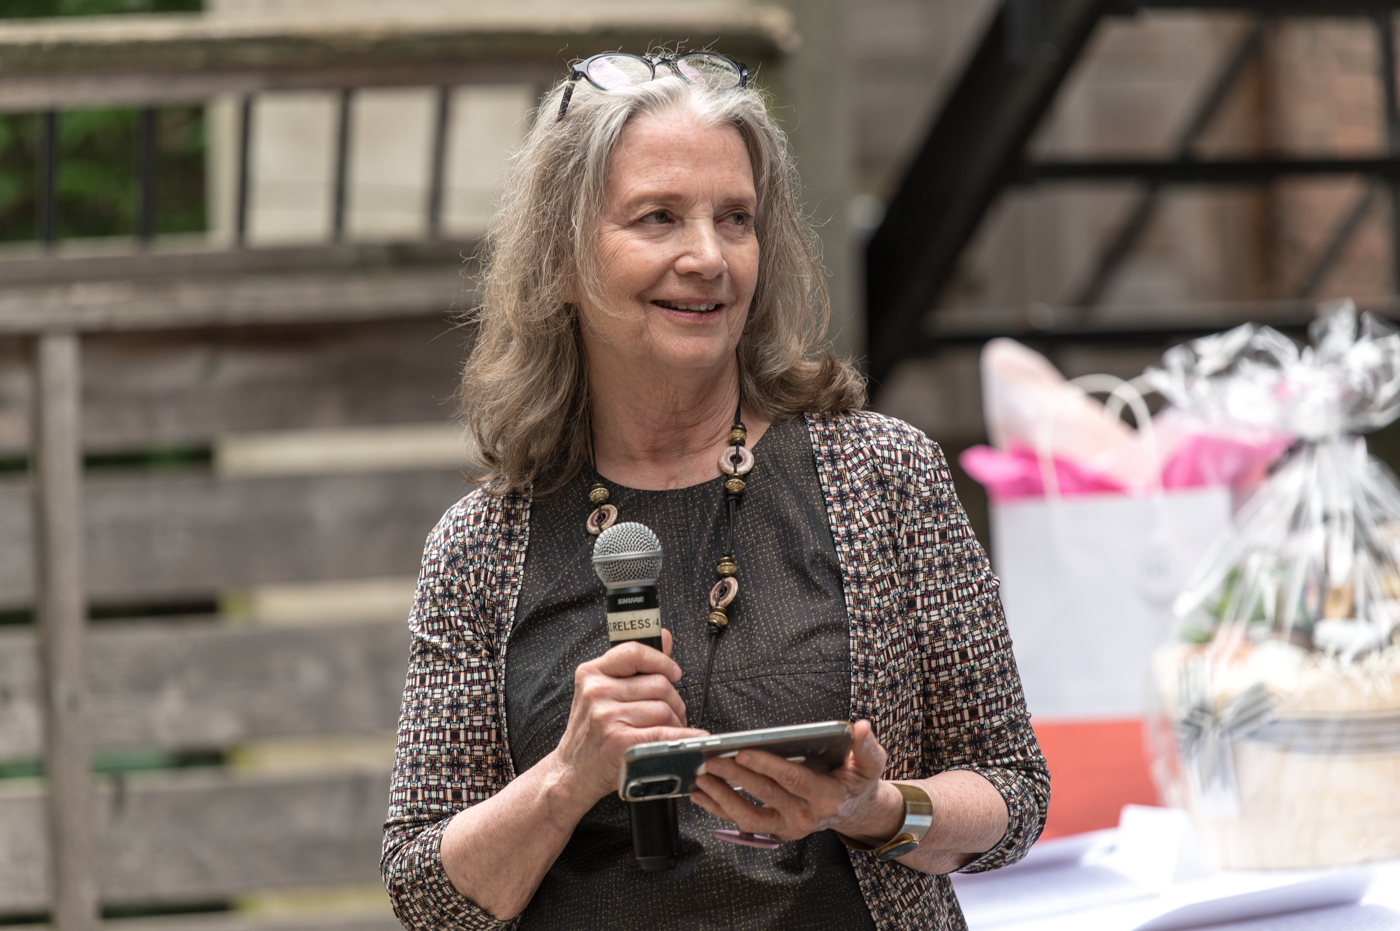 Sue holds a microphone at outdoor event